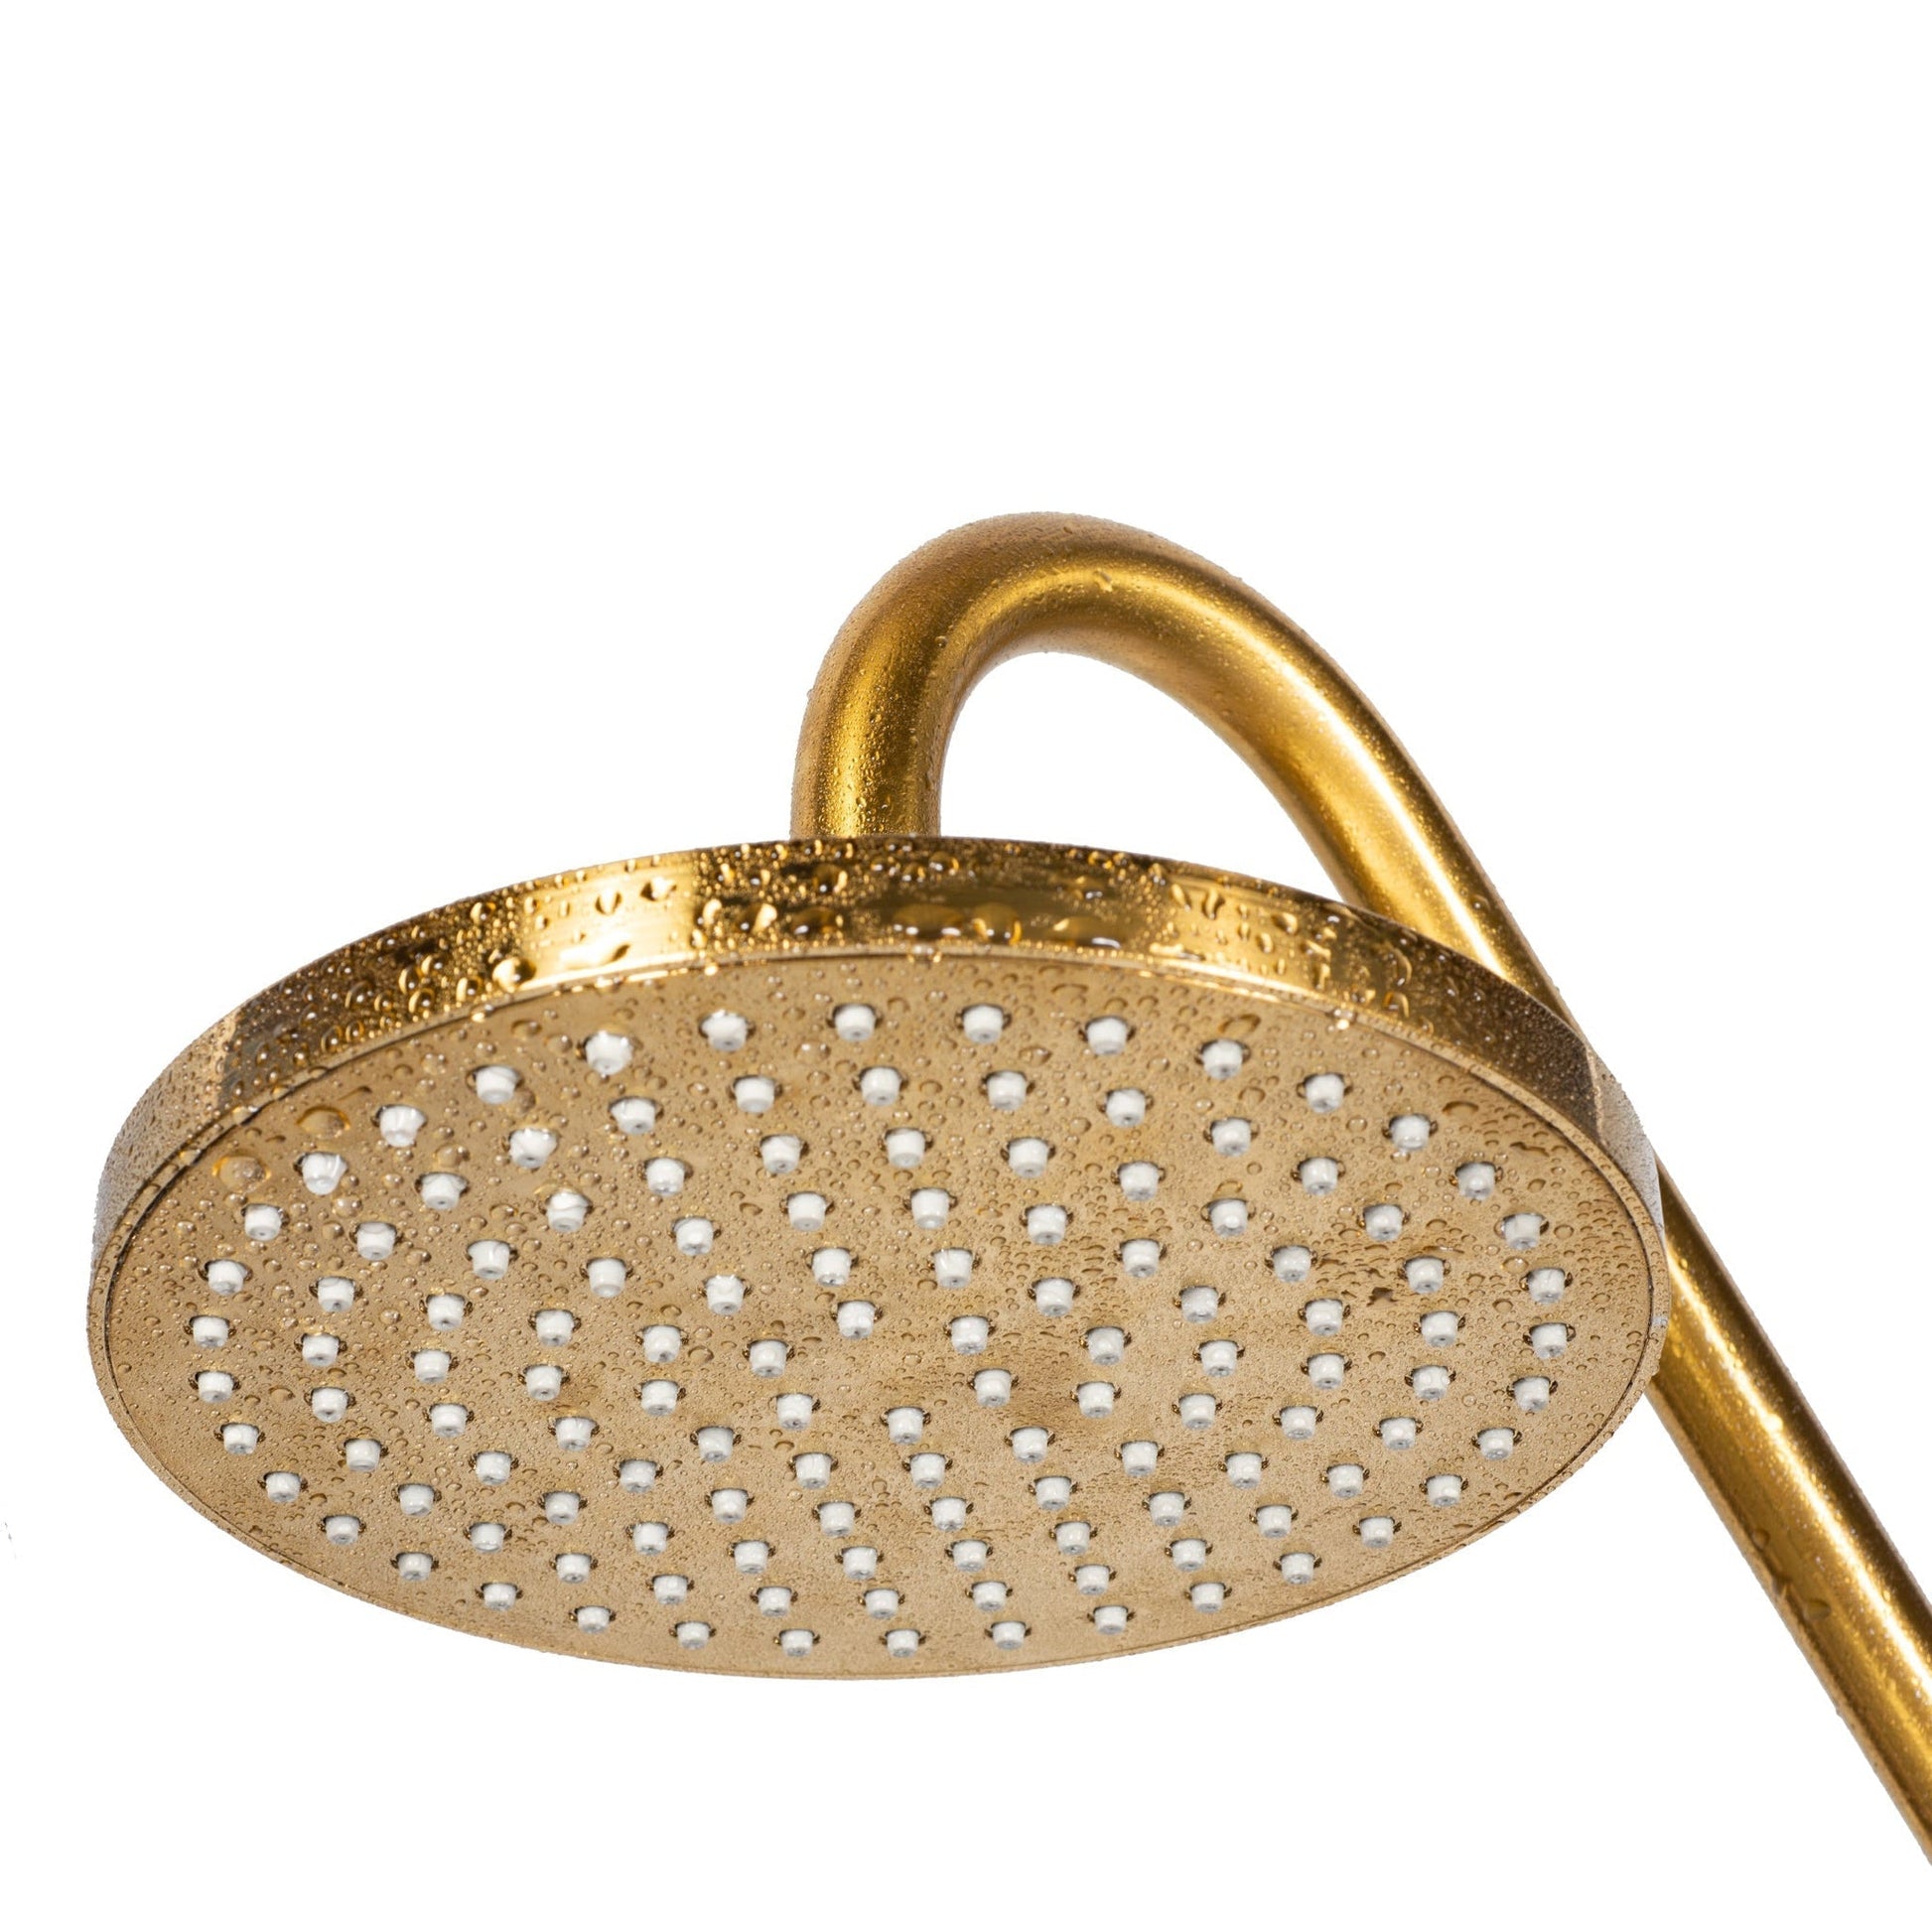 PULSE ShowerSpas Kauai III 2.5 GPM Rain Shower System in Brushed Gold Finish With 5-Function Hand Shower